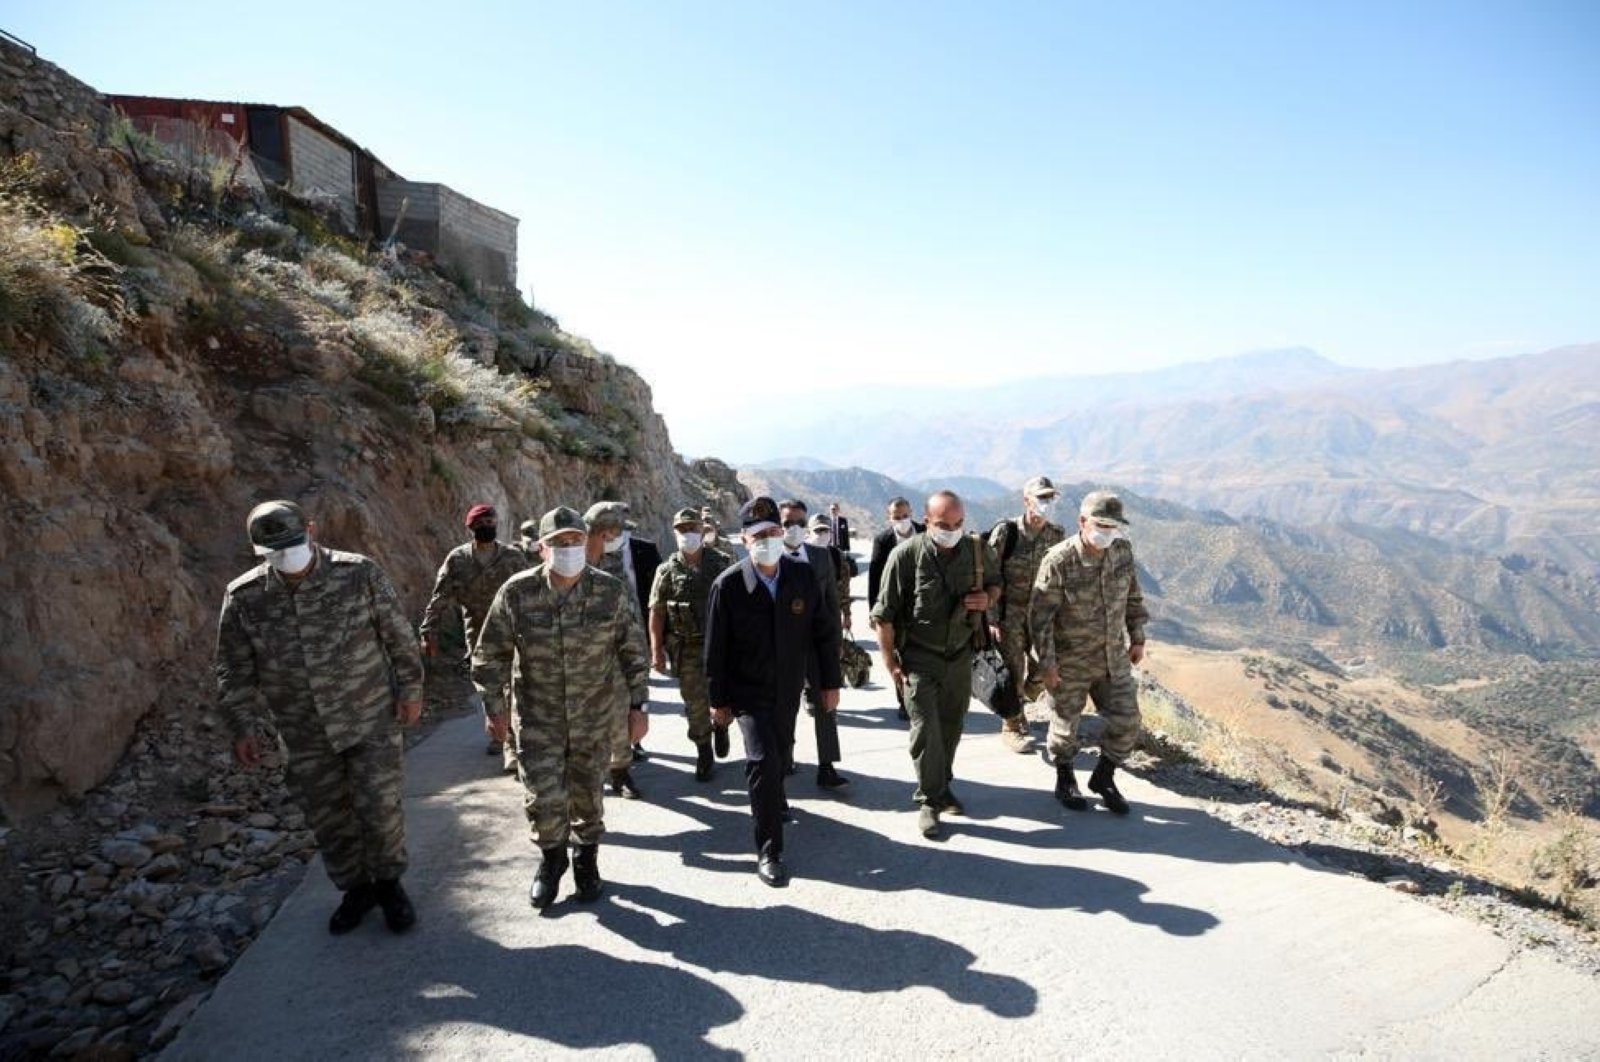 Defense Minister Hulusi Akar inspects troops at the Iraqi border in Turkey's southeastern Şırnak province, Aug. 9, 2020. (DHA Photo)